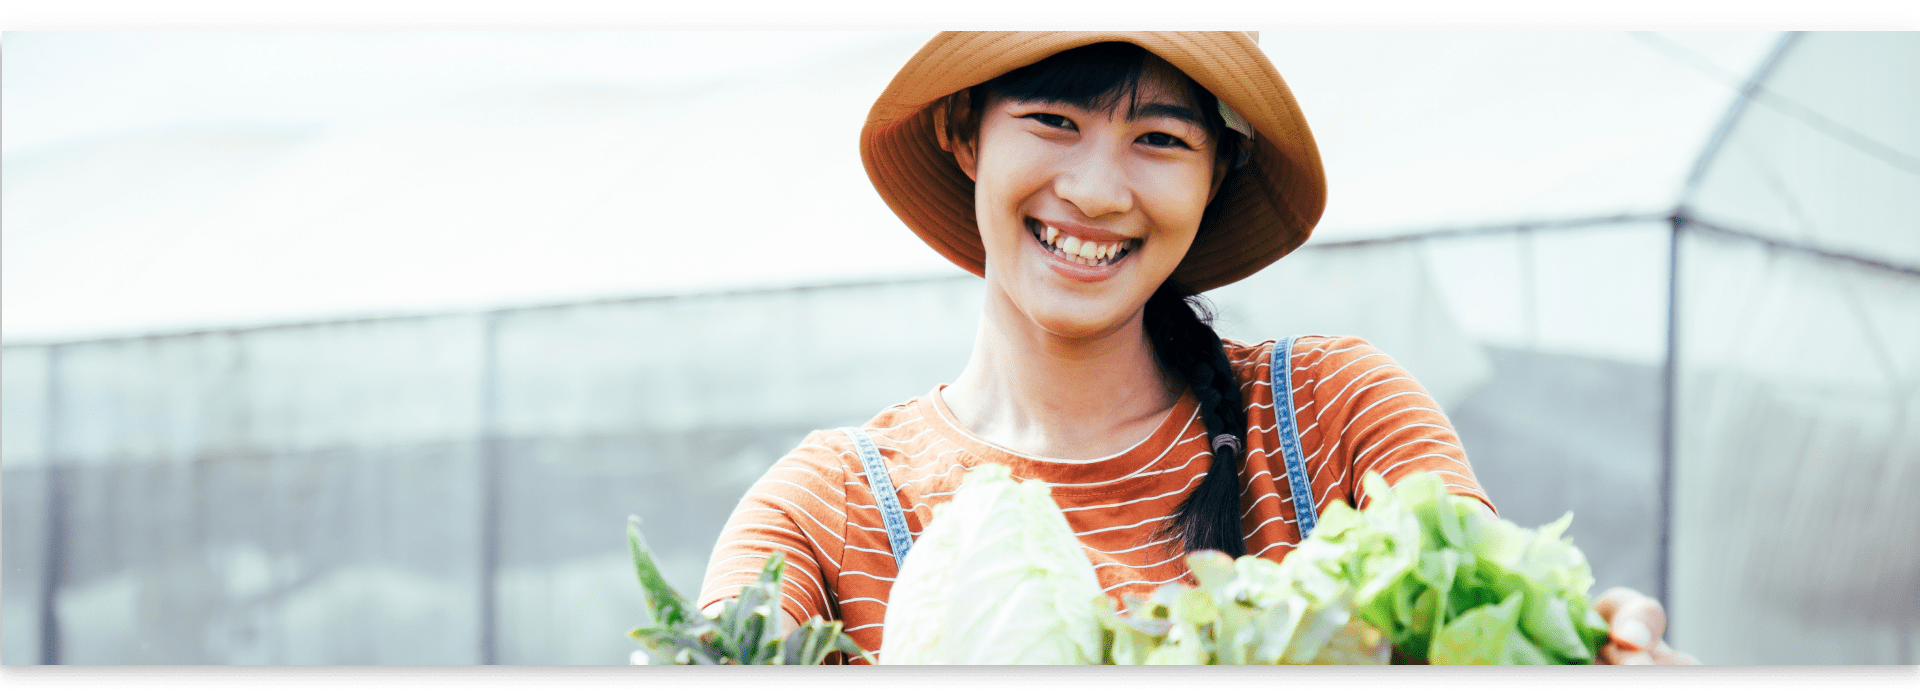 girl smiling and got plants in her hands